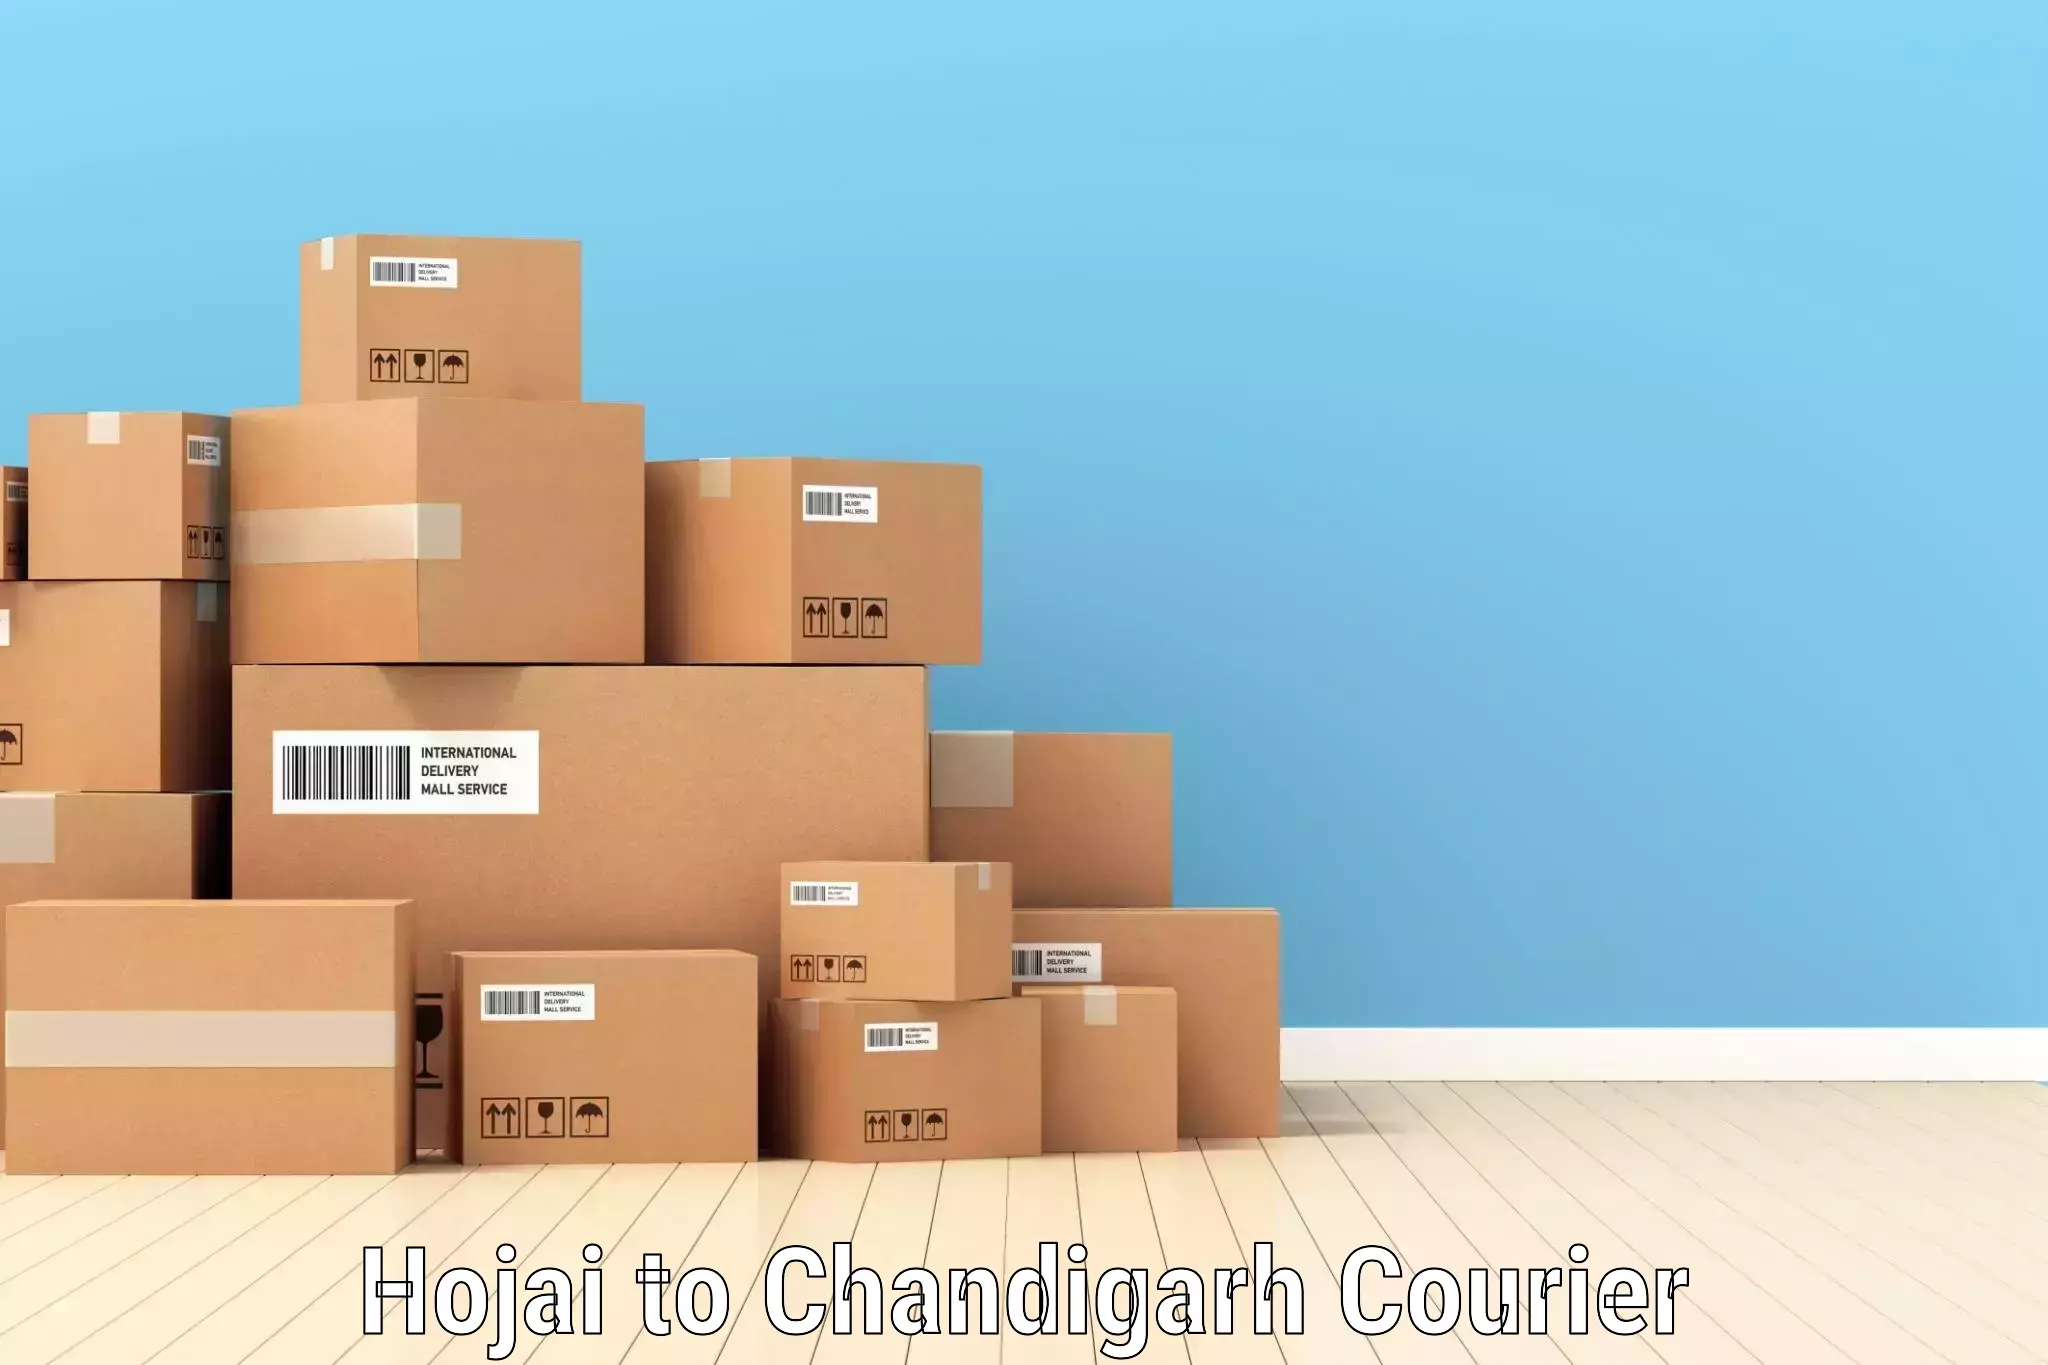 24-hour courier service Hojai to Chandigarh